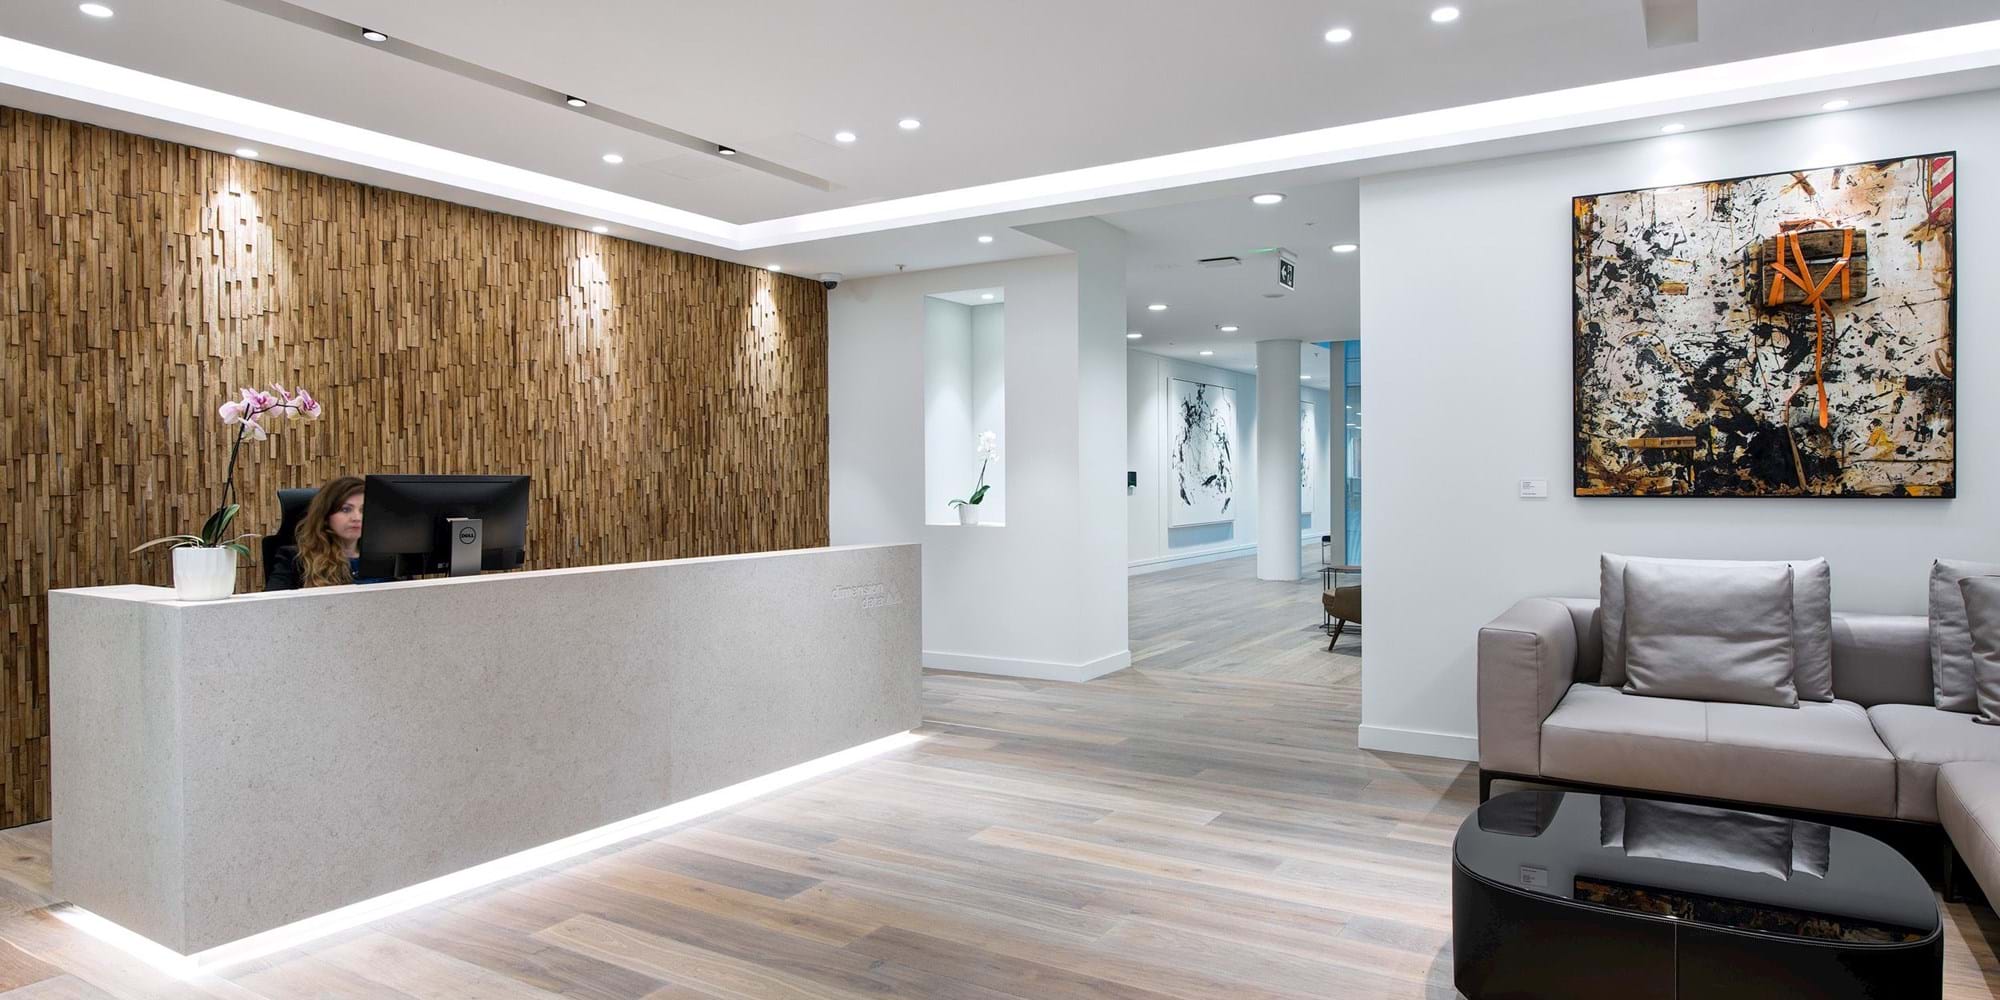 Modus Workspace office design, fit out and refurbishment - Dimension Data - Reception - Dimension Data 02 highres sRGB.jpg